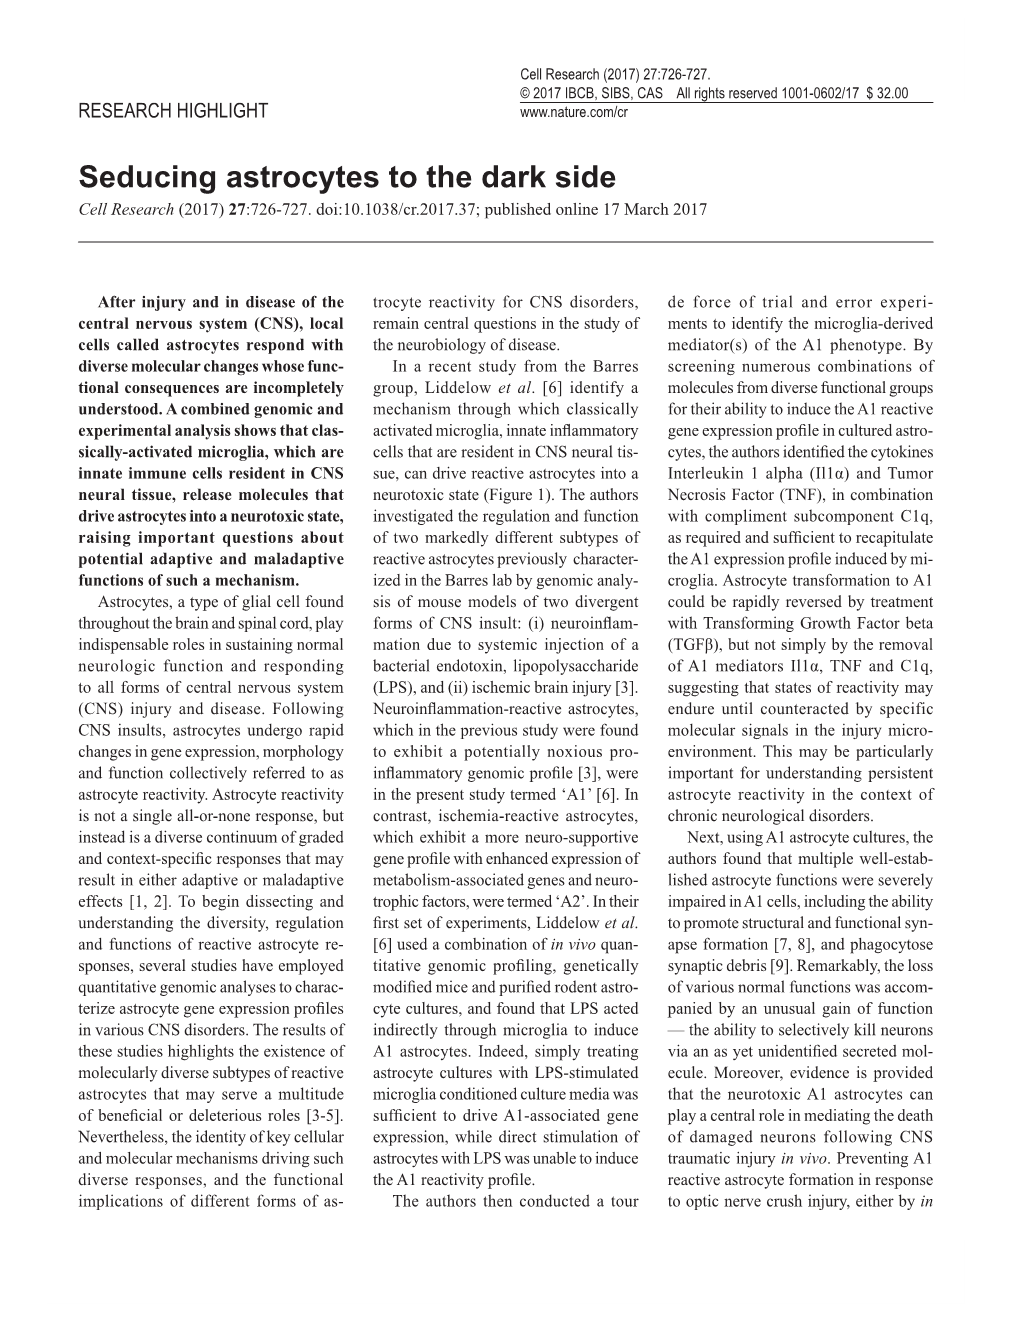 Seducing Astrocytes to the Dark Side Cell Research (2017) 27:726-727